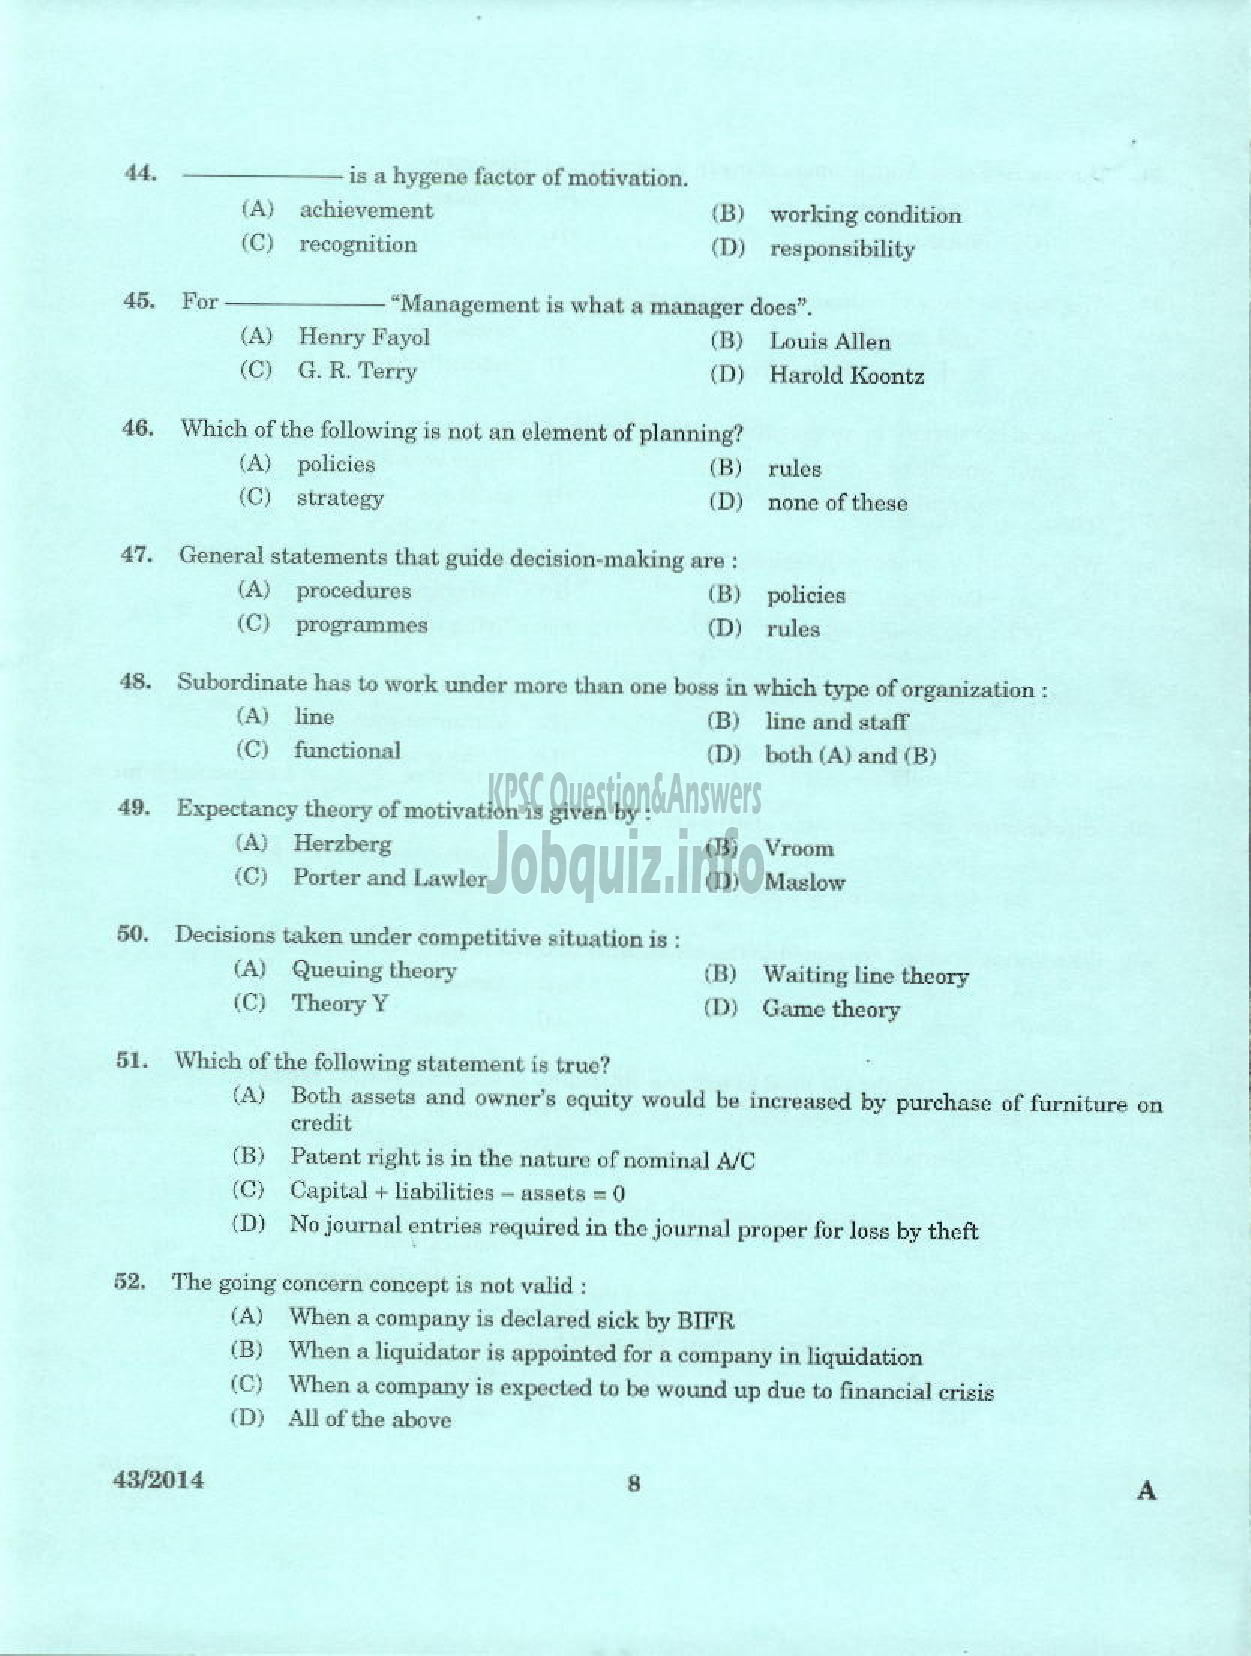 Kerala PSC Question Paper - DEPUTY GENERAL MANAGER DCB IDKY AND KSGD PART I AND PART II-6